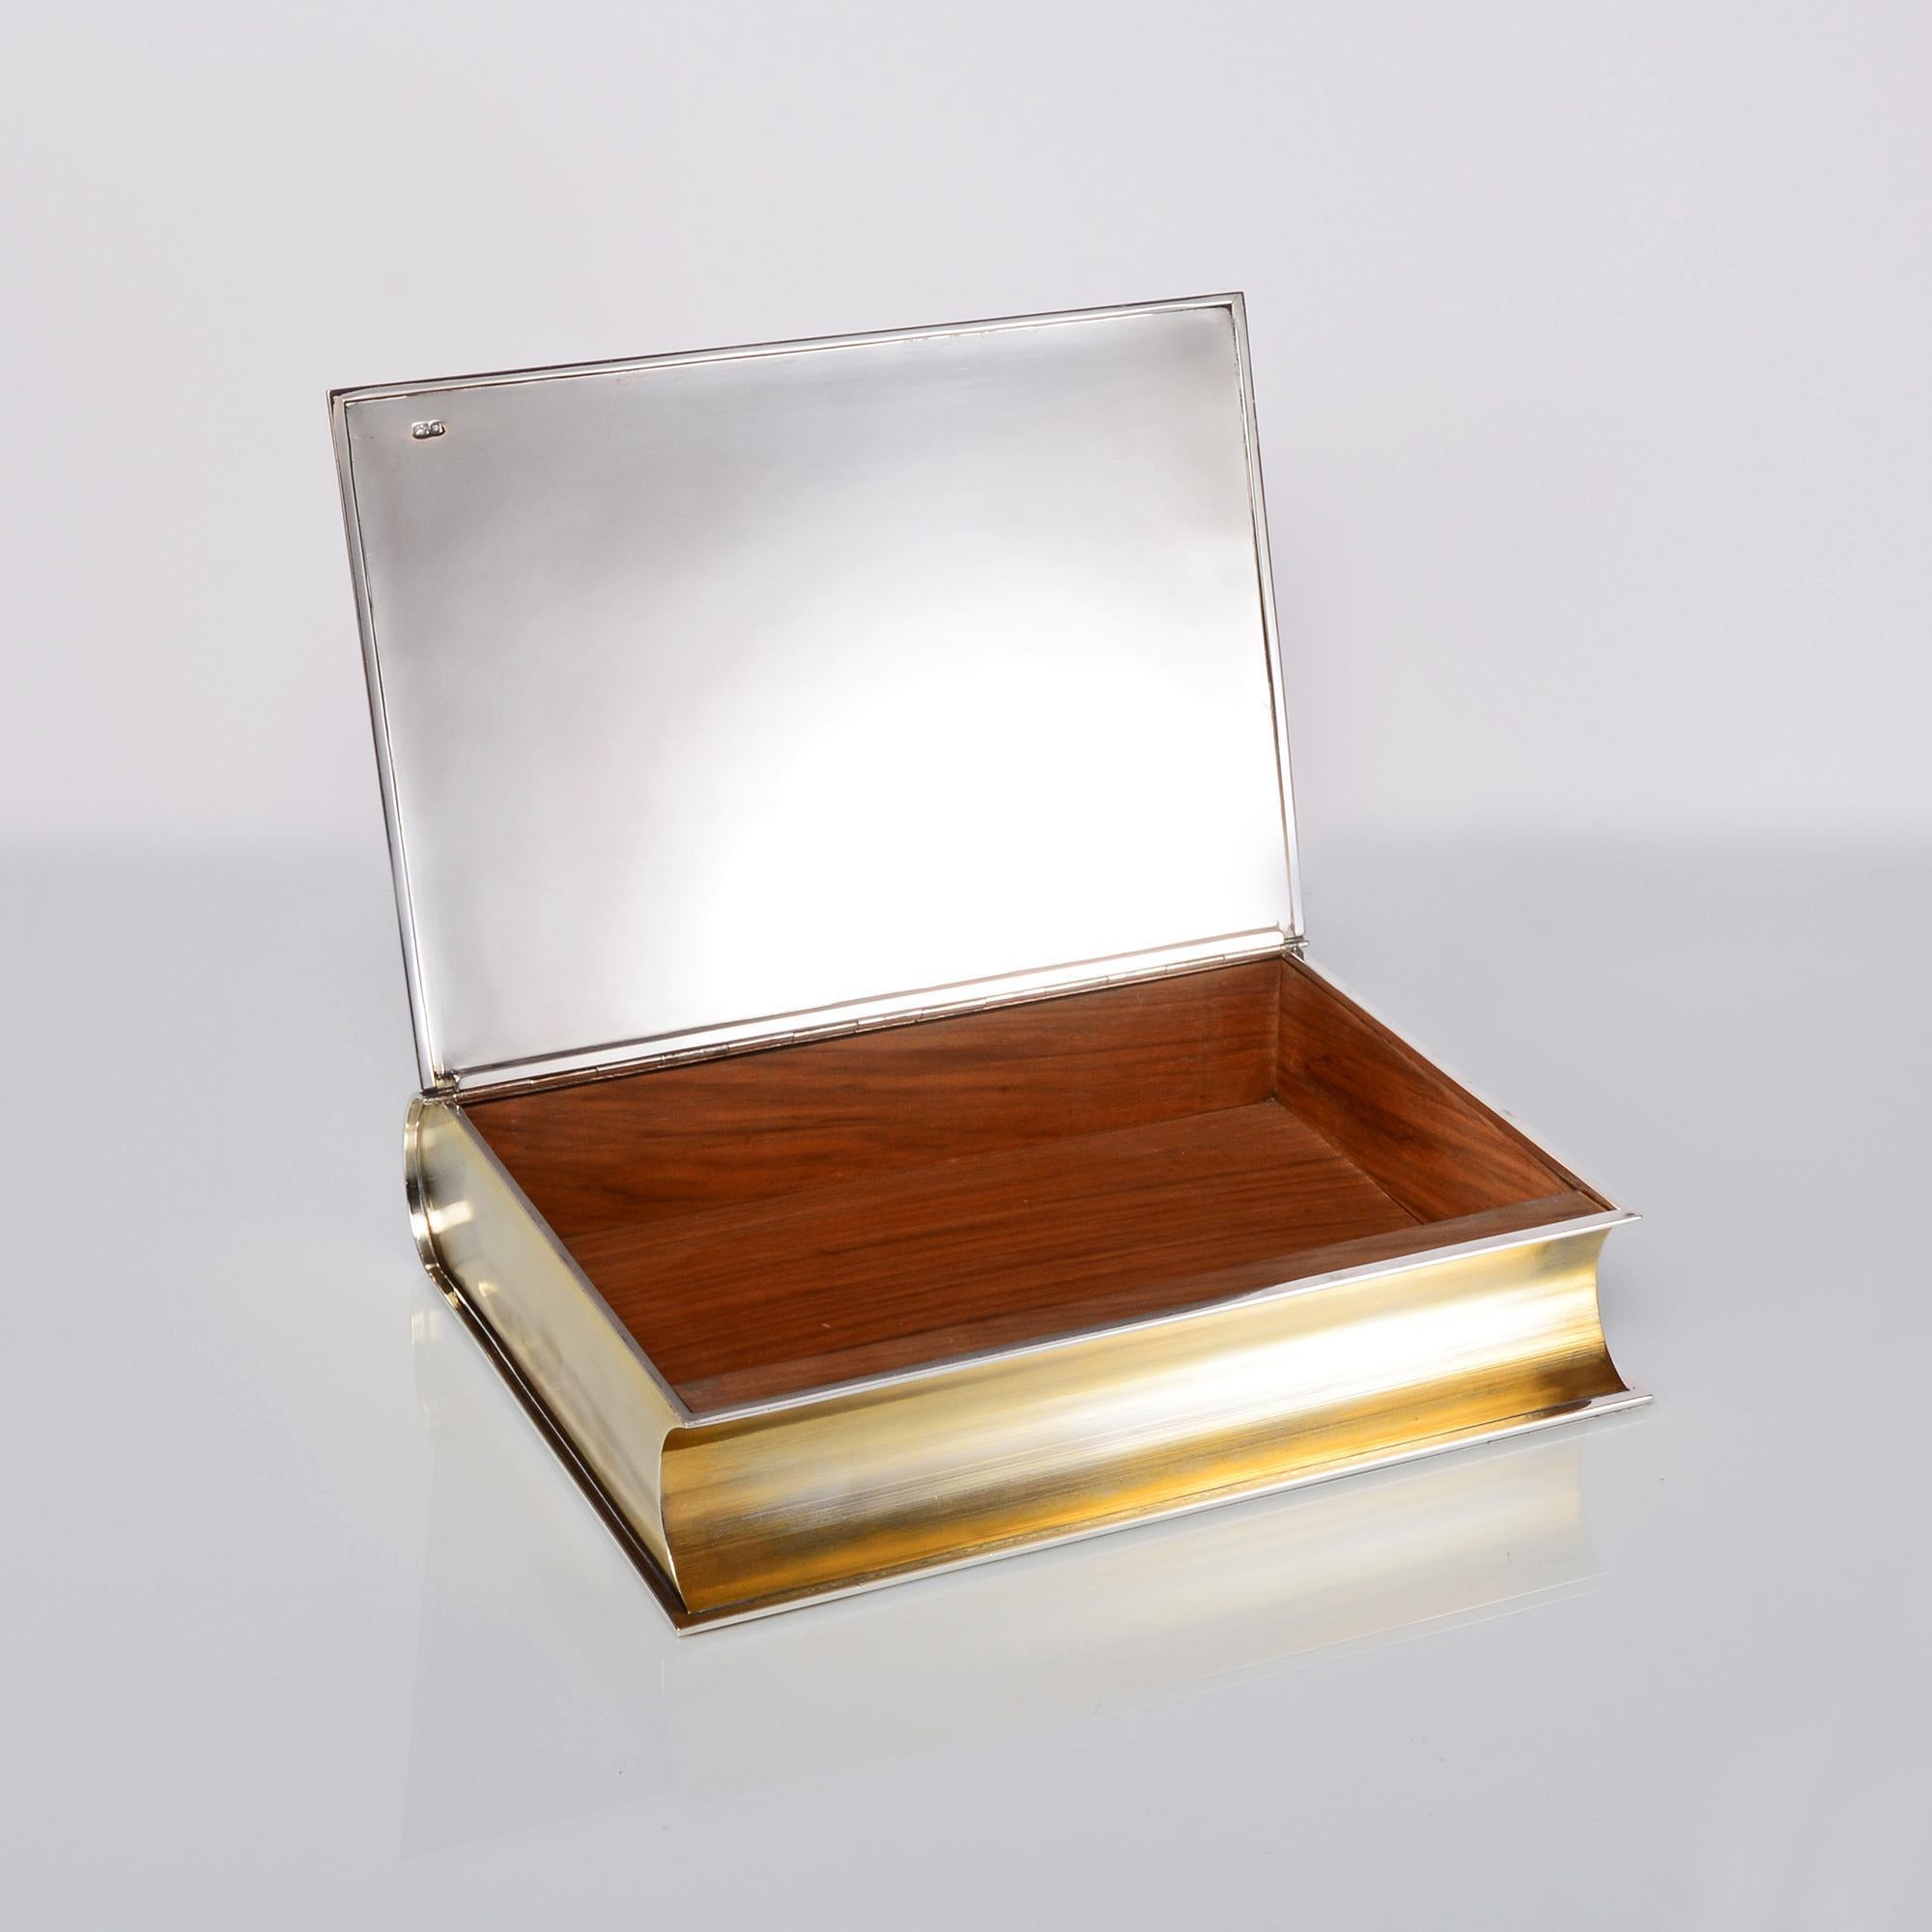 Large fine quality handmade wood-lined silver box with gilded sections, in the form of a traditional leather-bound book. The body is engraved to resemble the pages and the spine to resemble the traditional embossed mouldings of an antique leather